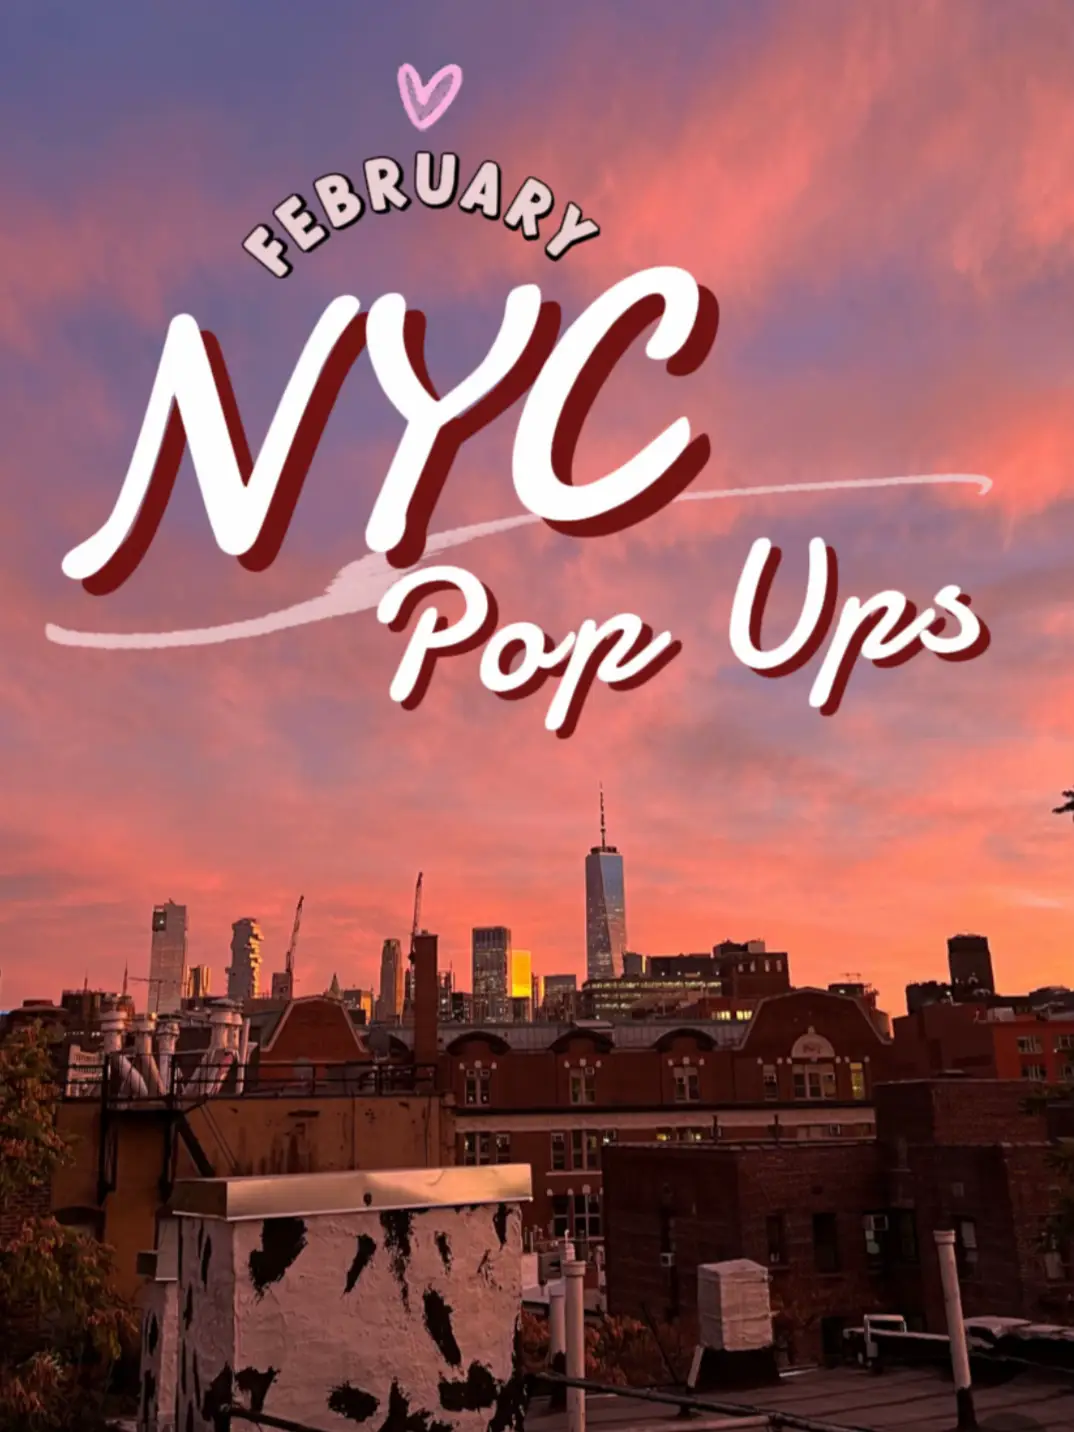  A city skyline with a sign that says "December 2016 New York Pop Ups".